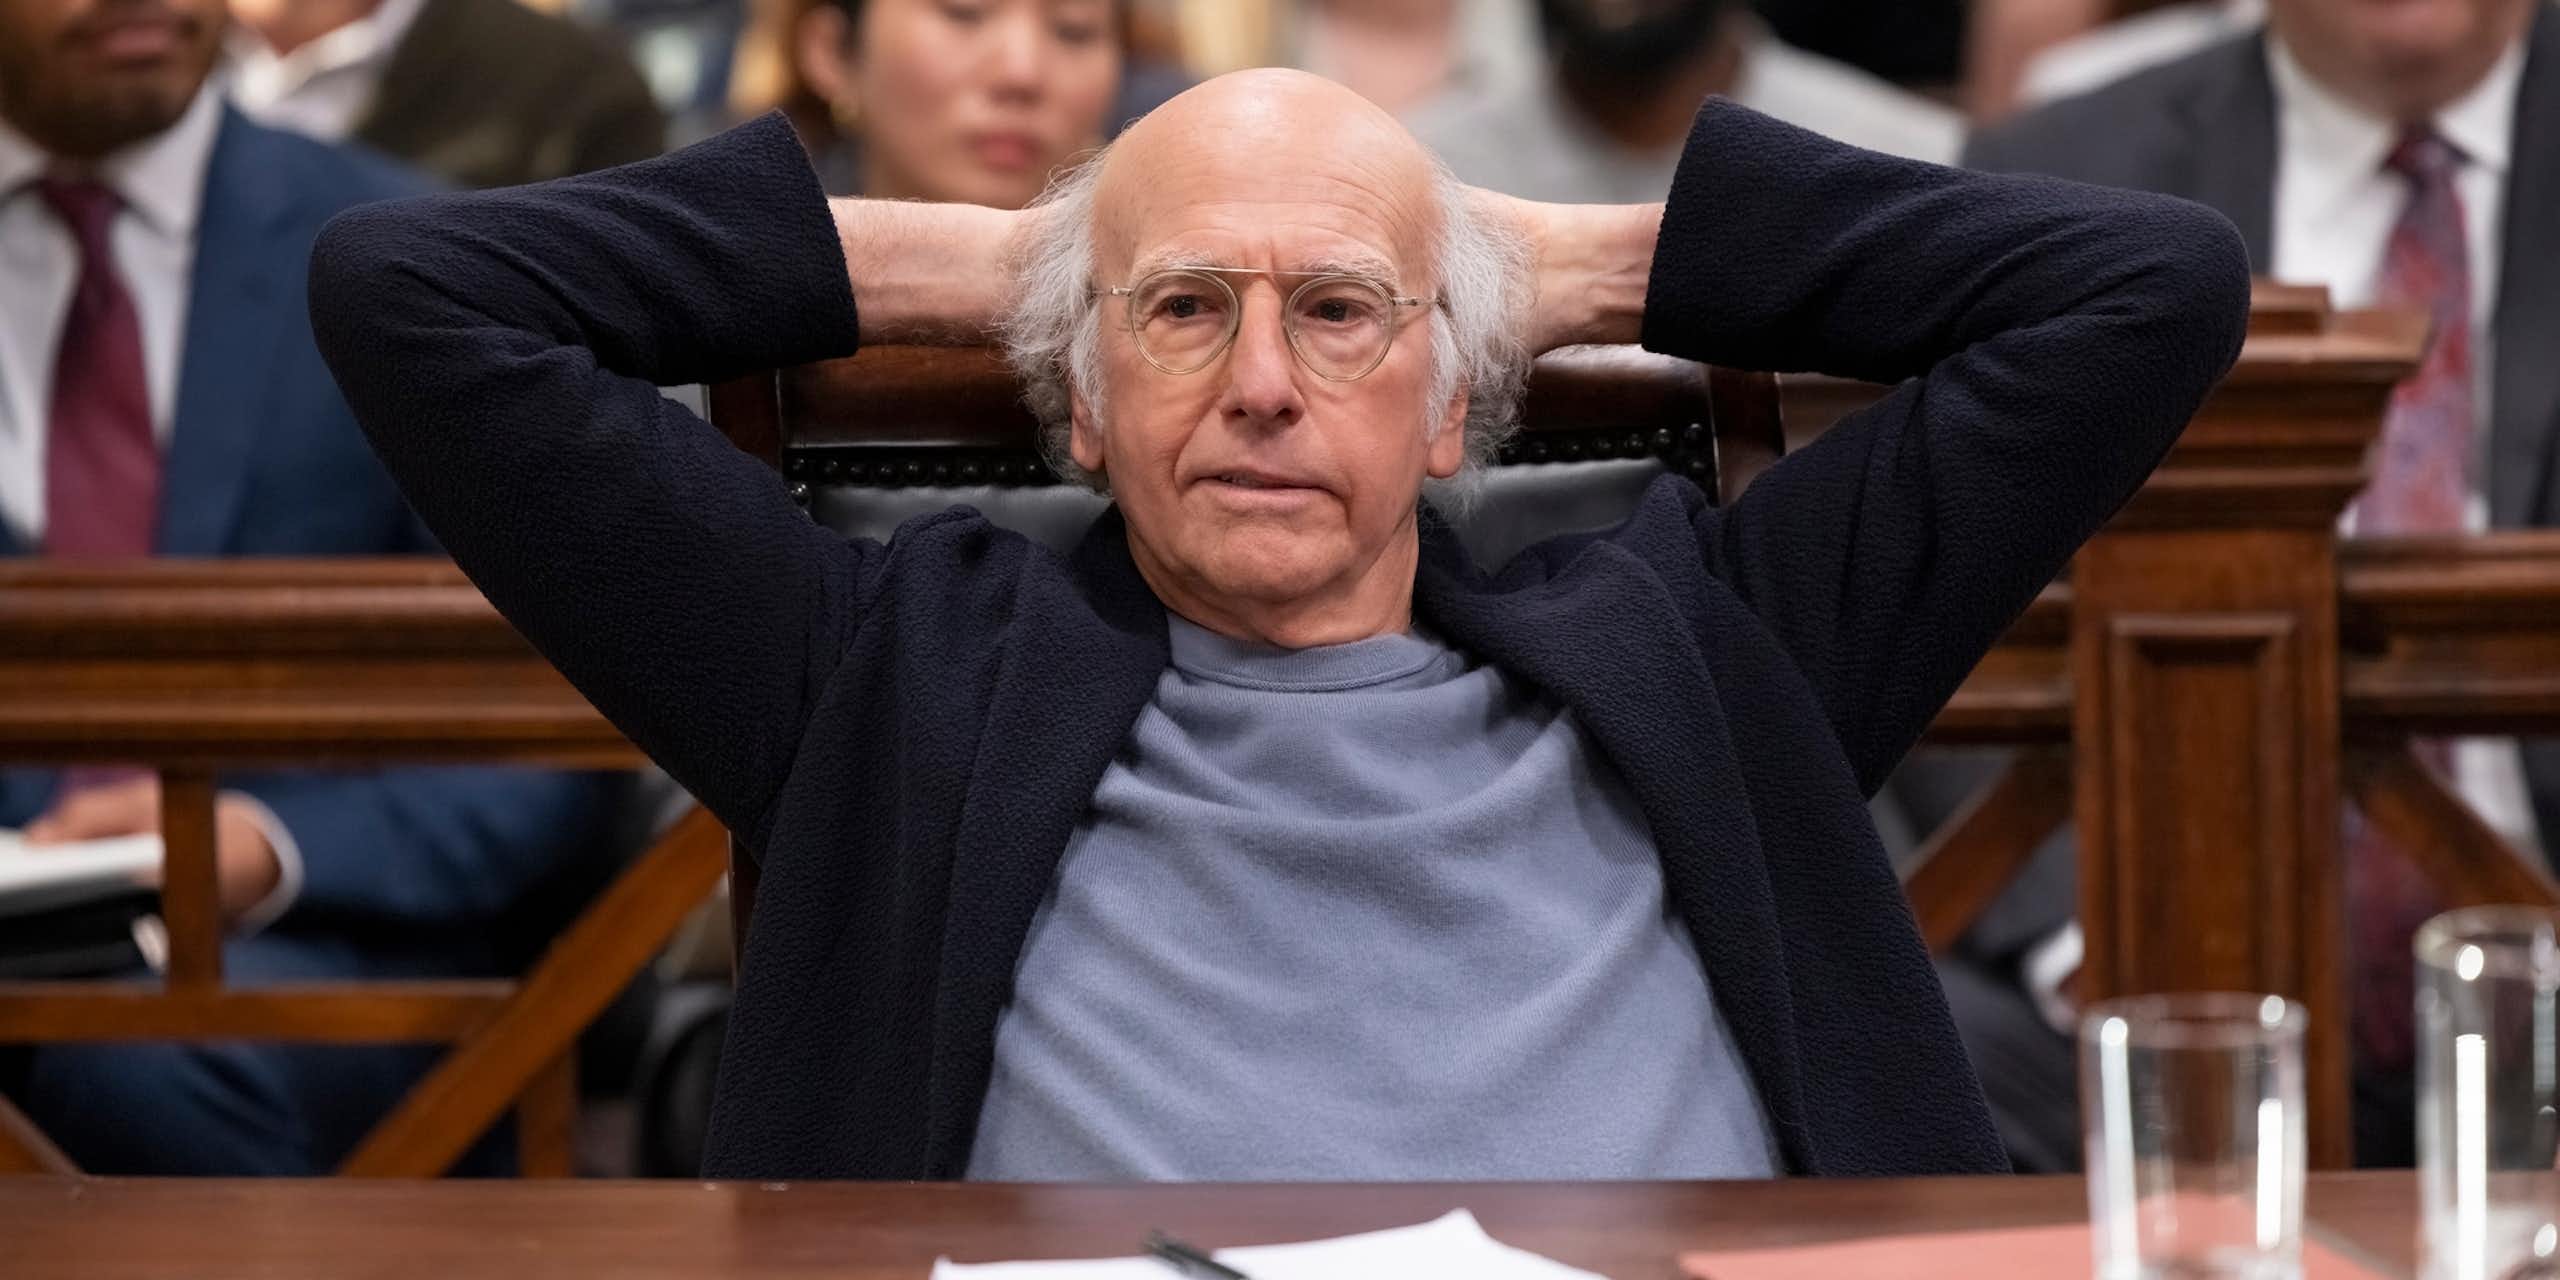 Larry David sits at a desk with his hands behind his head